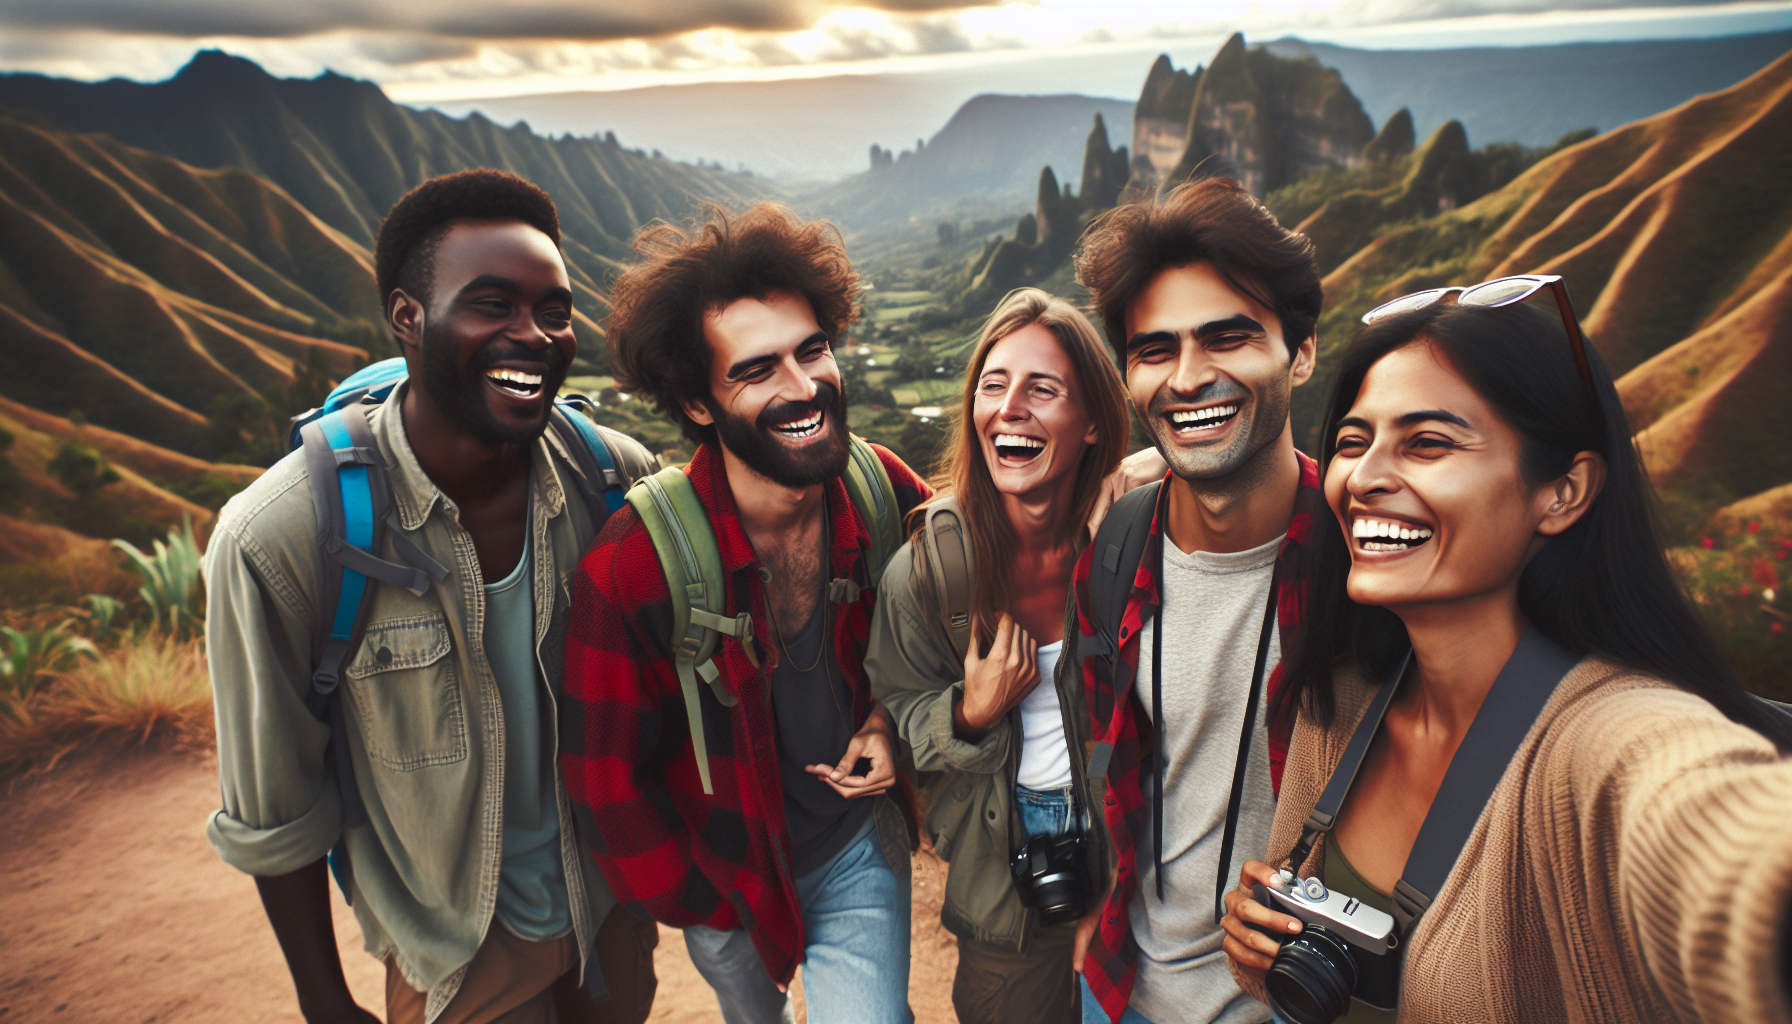 discover unforgettable group travel stories on our engaging travel blog. get inspired to plan your next trip with friends and create lifelong memories.